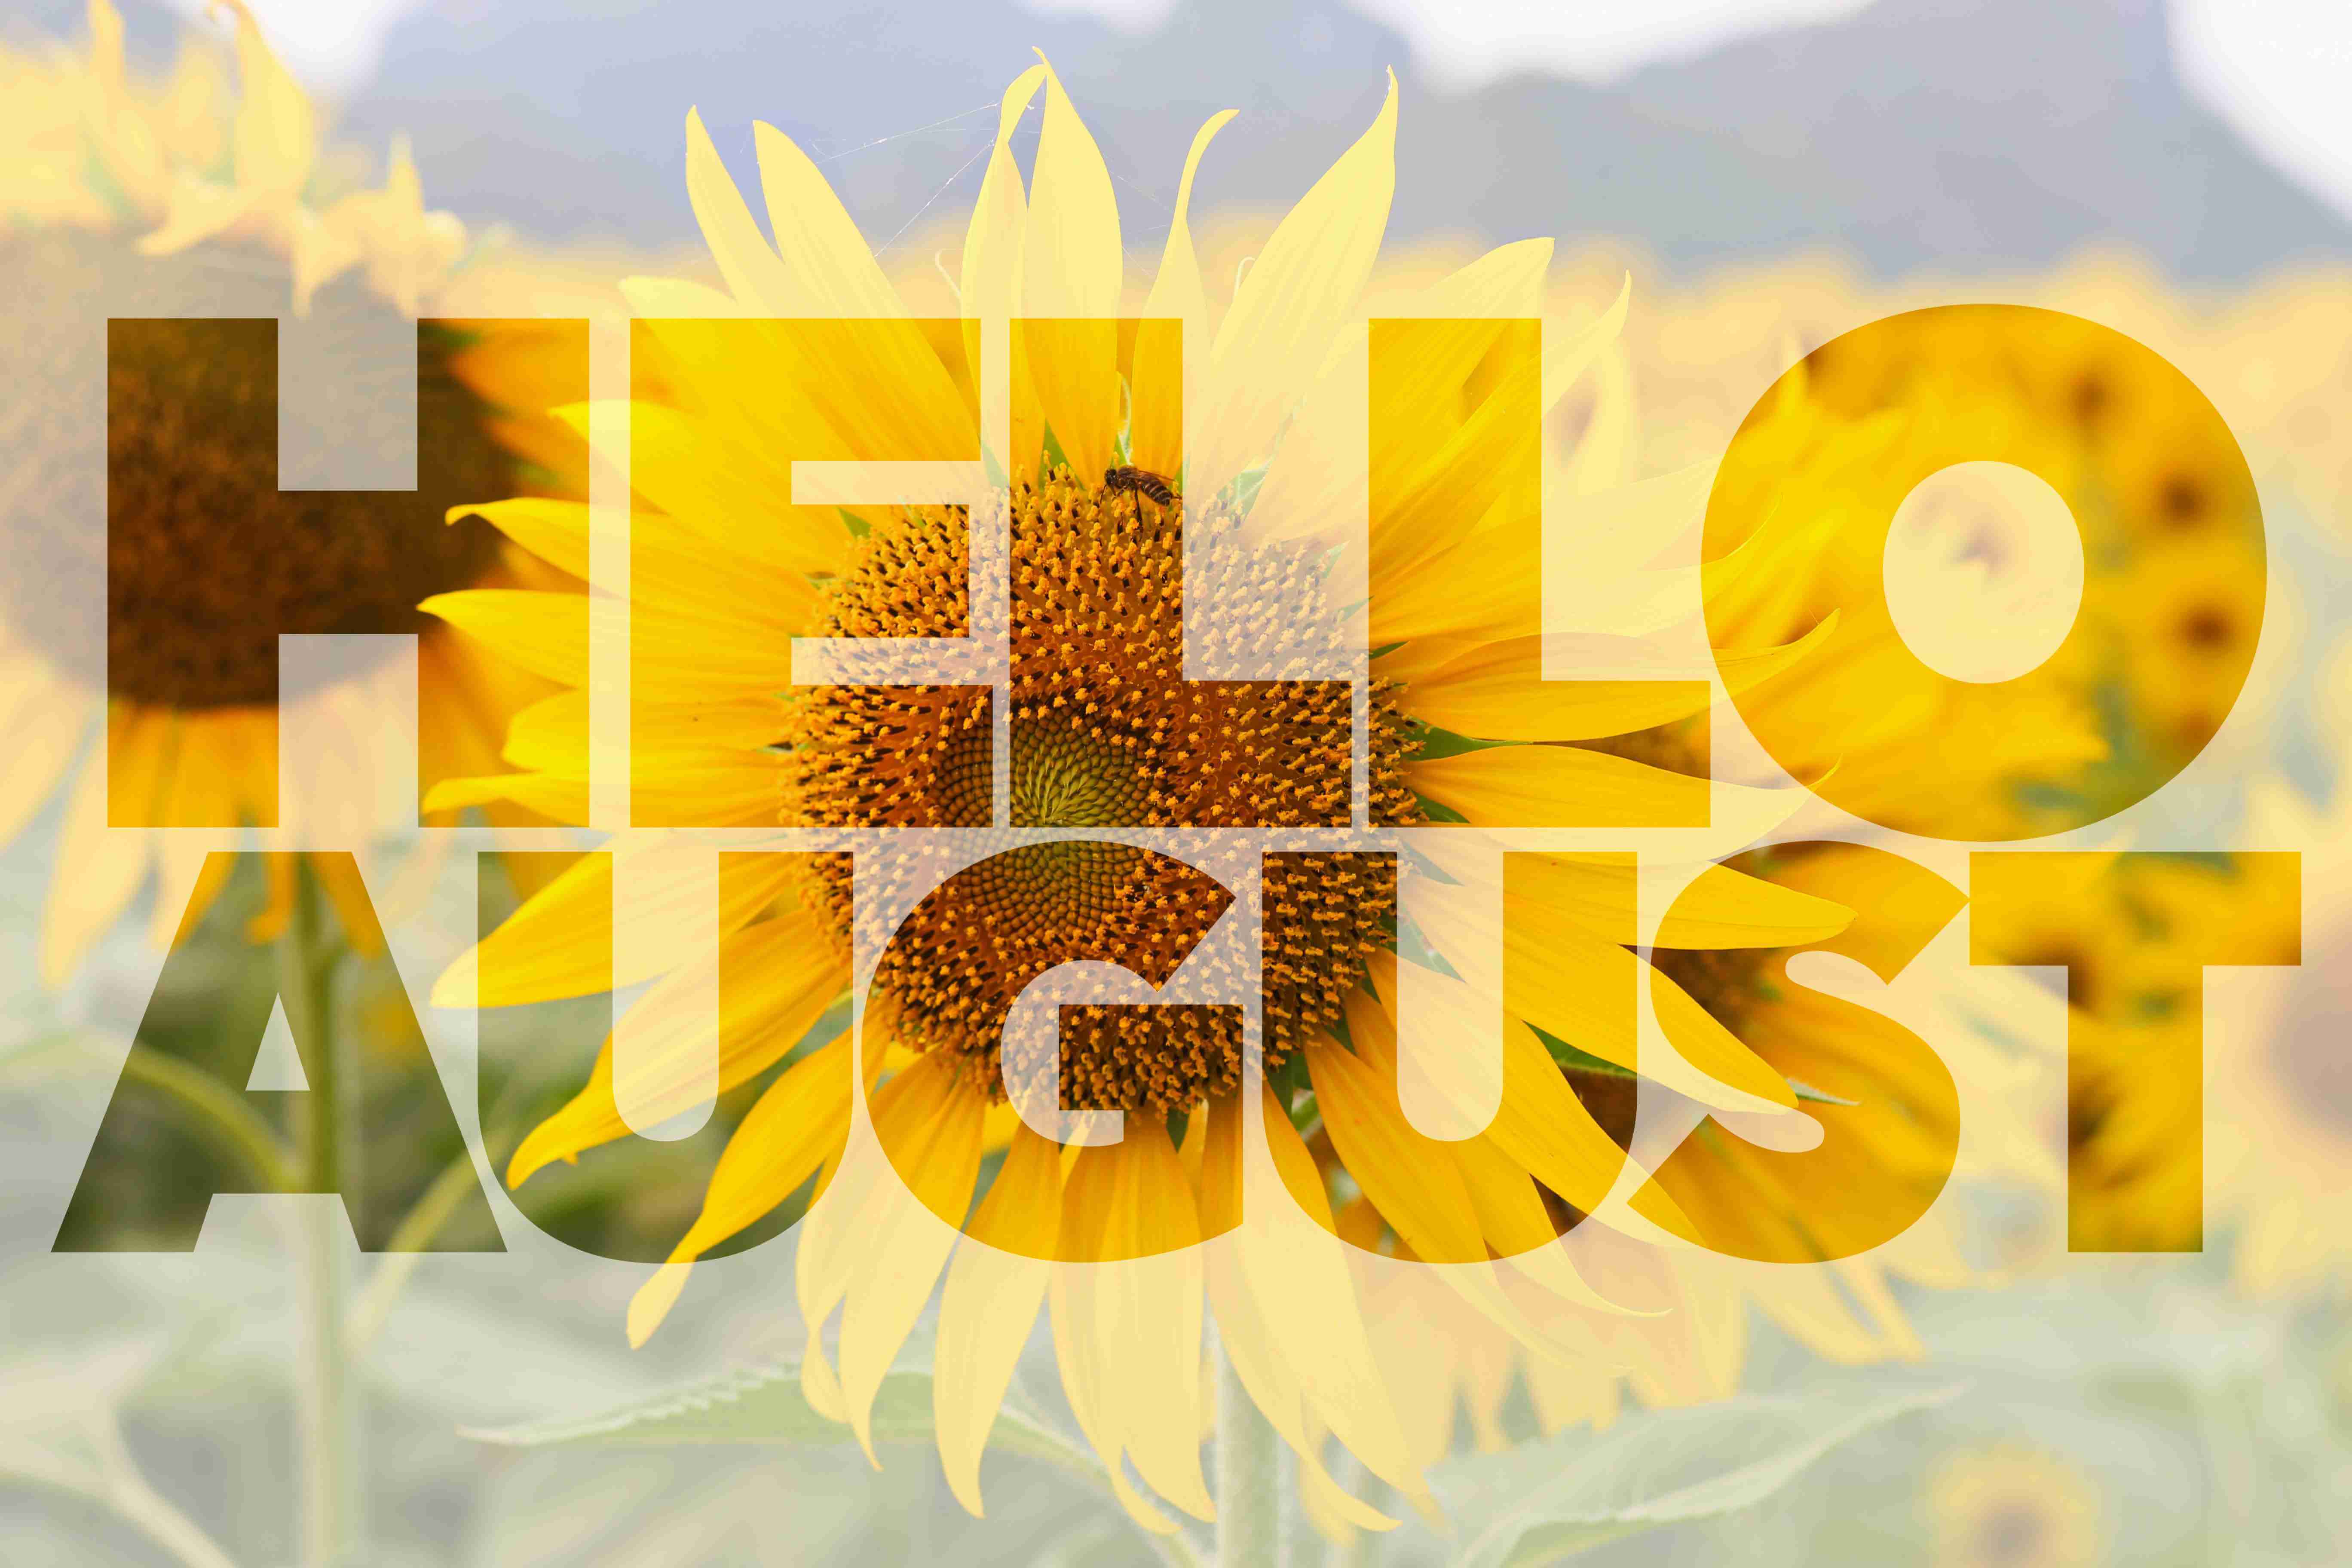 Hello August Images